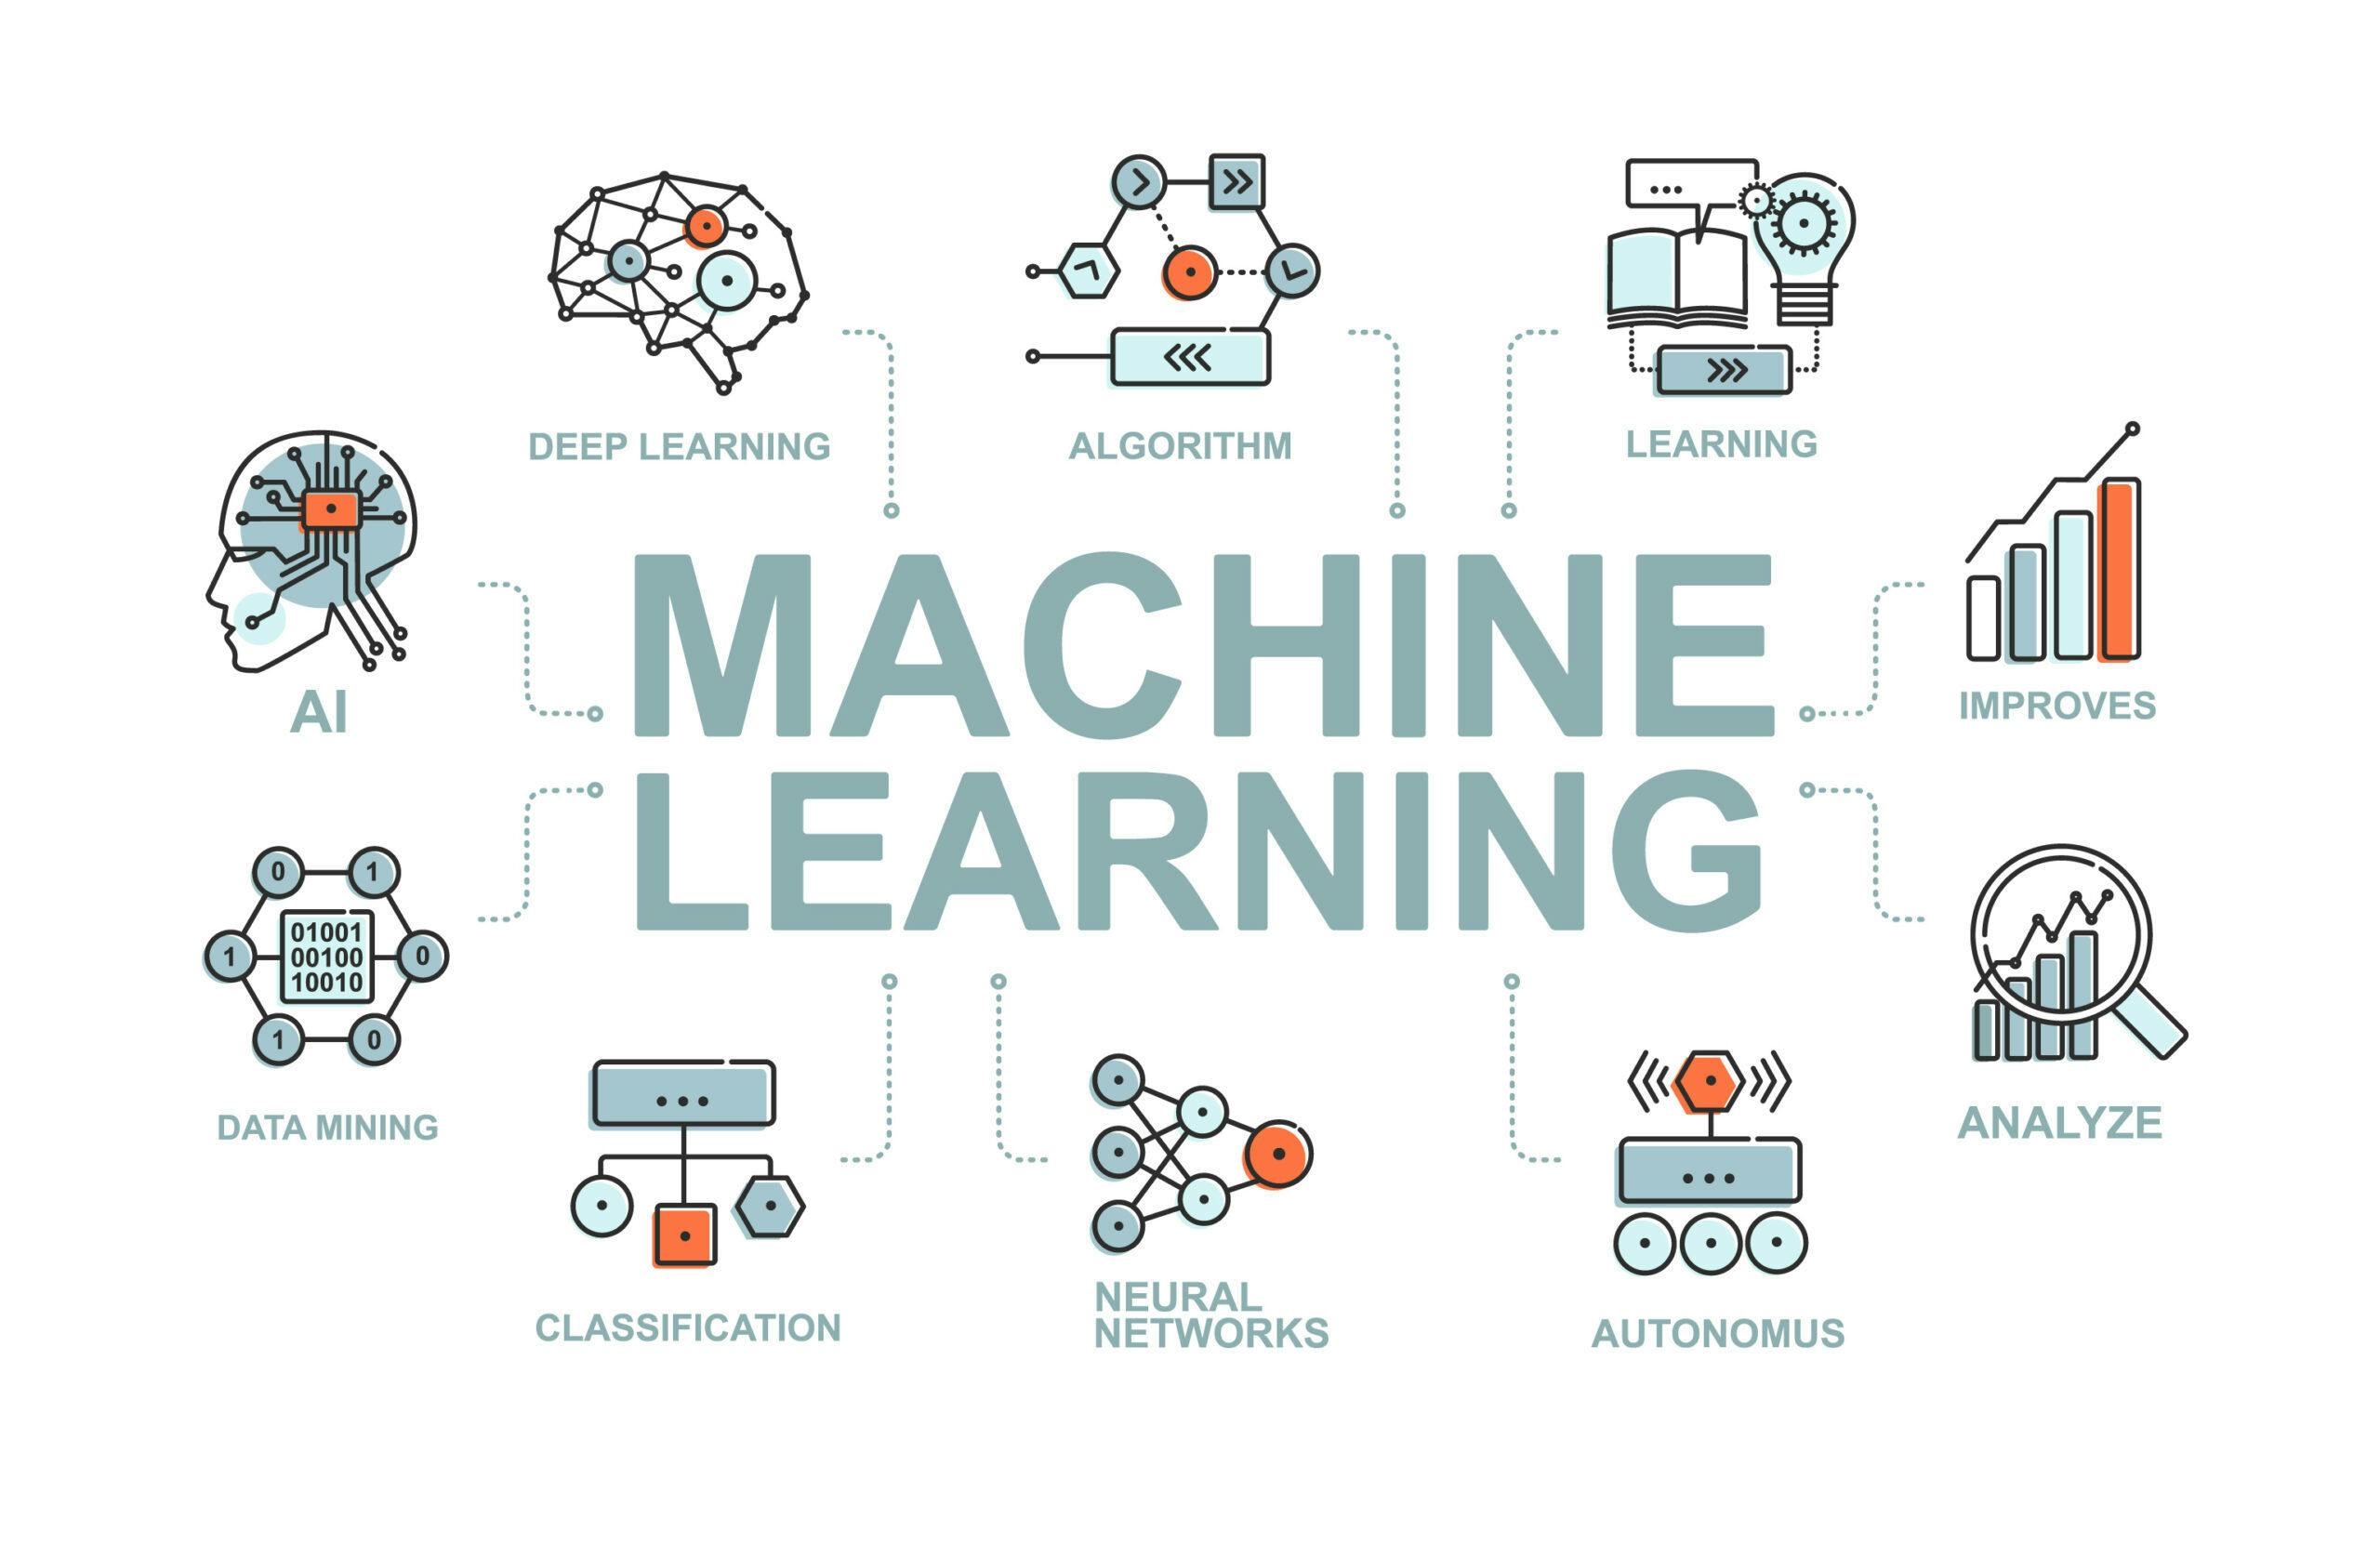 machine-learning-helps-life-insurance-scaled.jpg